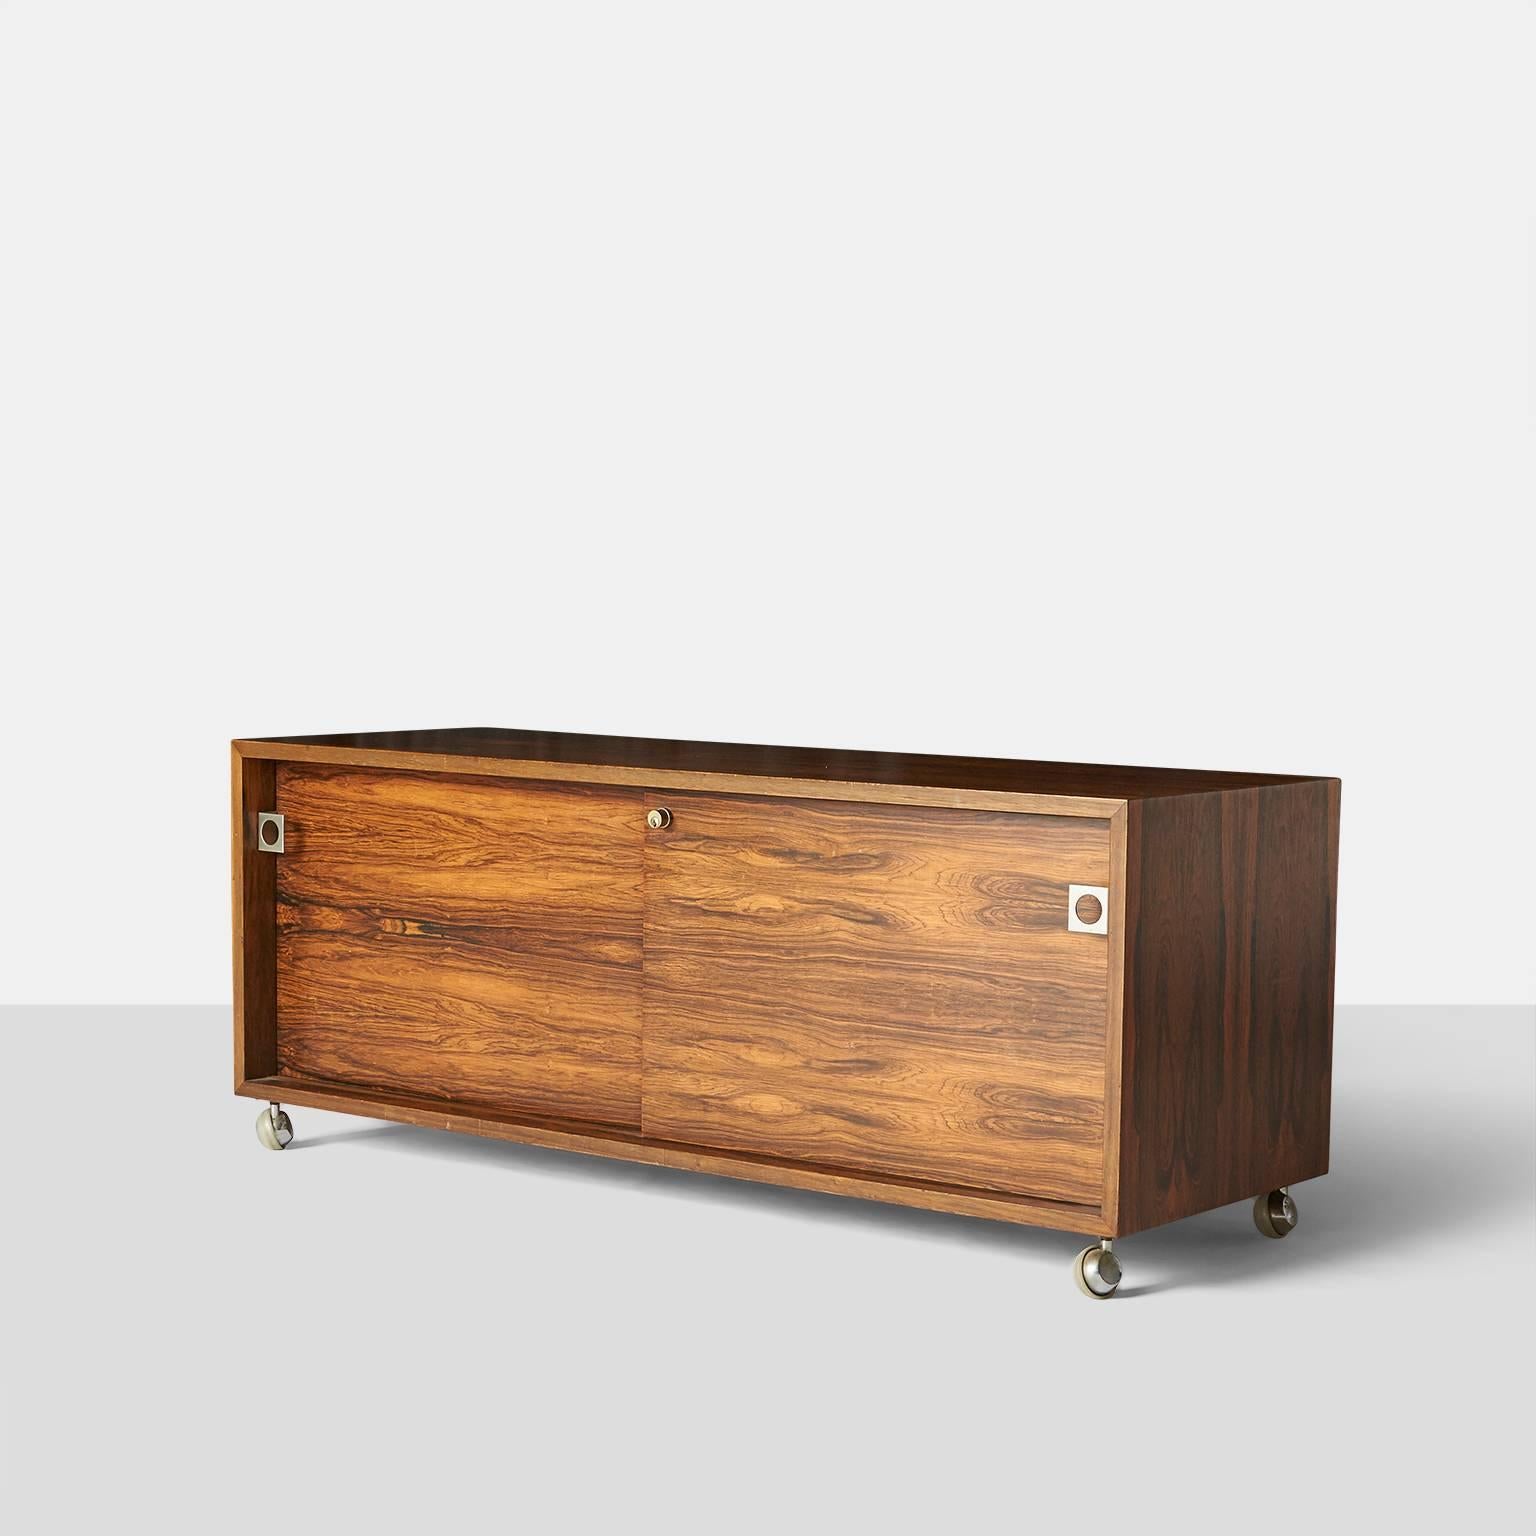 Storage cabinet by Bodil Kjaer.
A storage cabinet in rosewood with two bypassing doors and an adjustable shelf on each side. The rosewood cabinet has four casters, steel square form door pulls, and a lock for the doors. Produced by E. Pedersen &